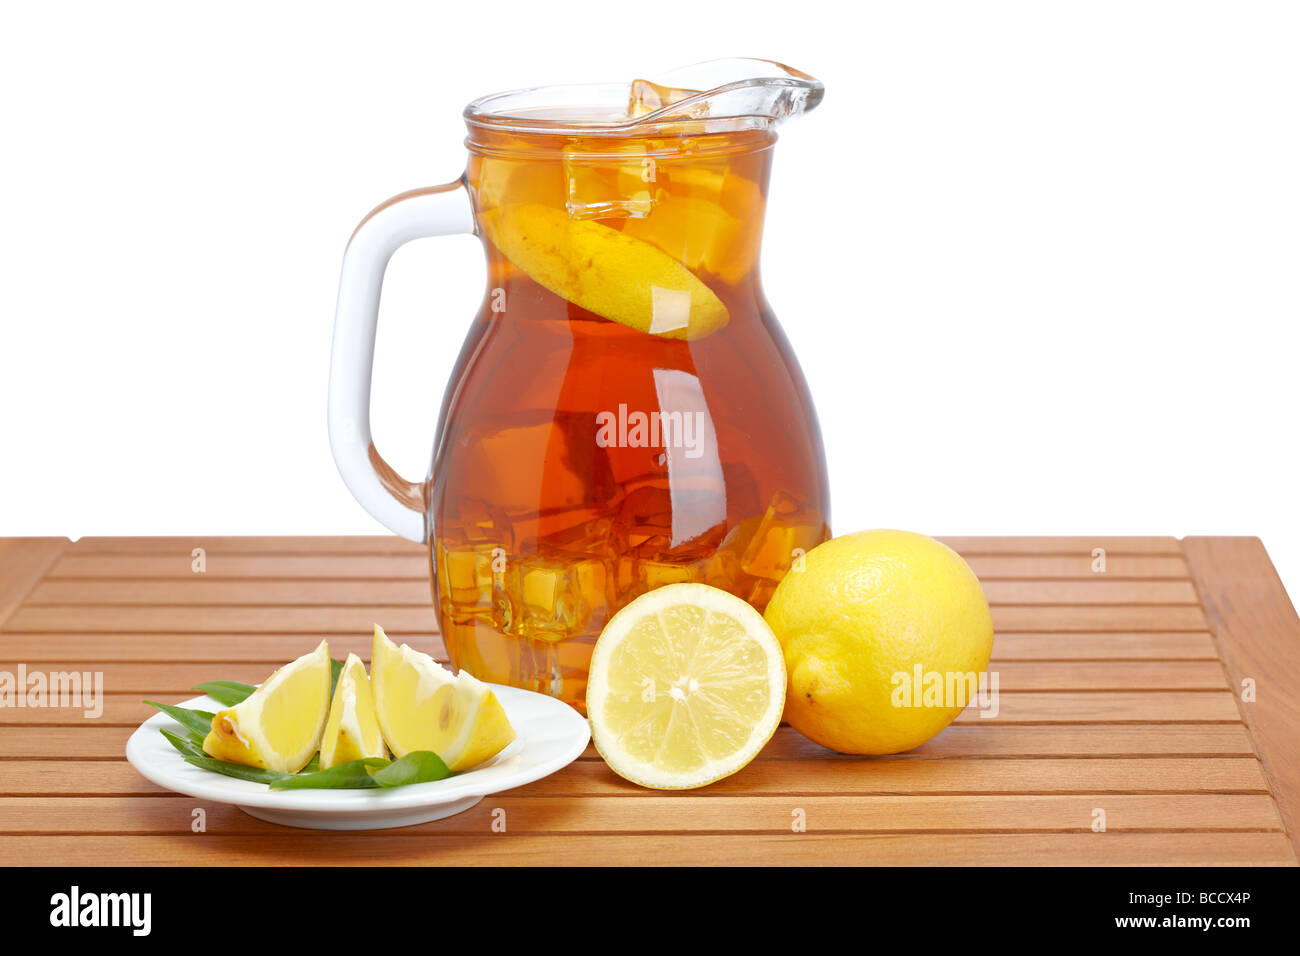 Ice tea pitcher with lemon and icecubes on wooden background Stock Photo